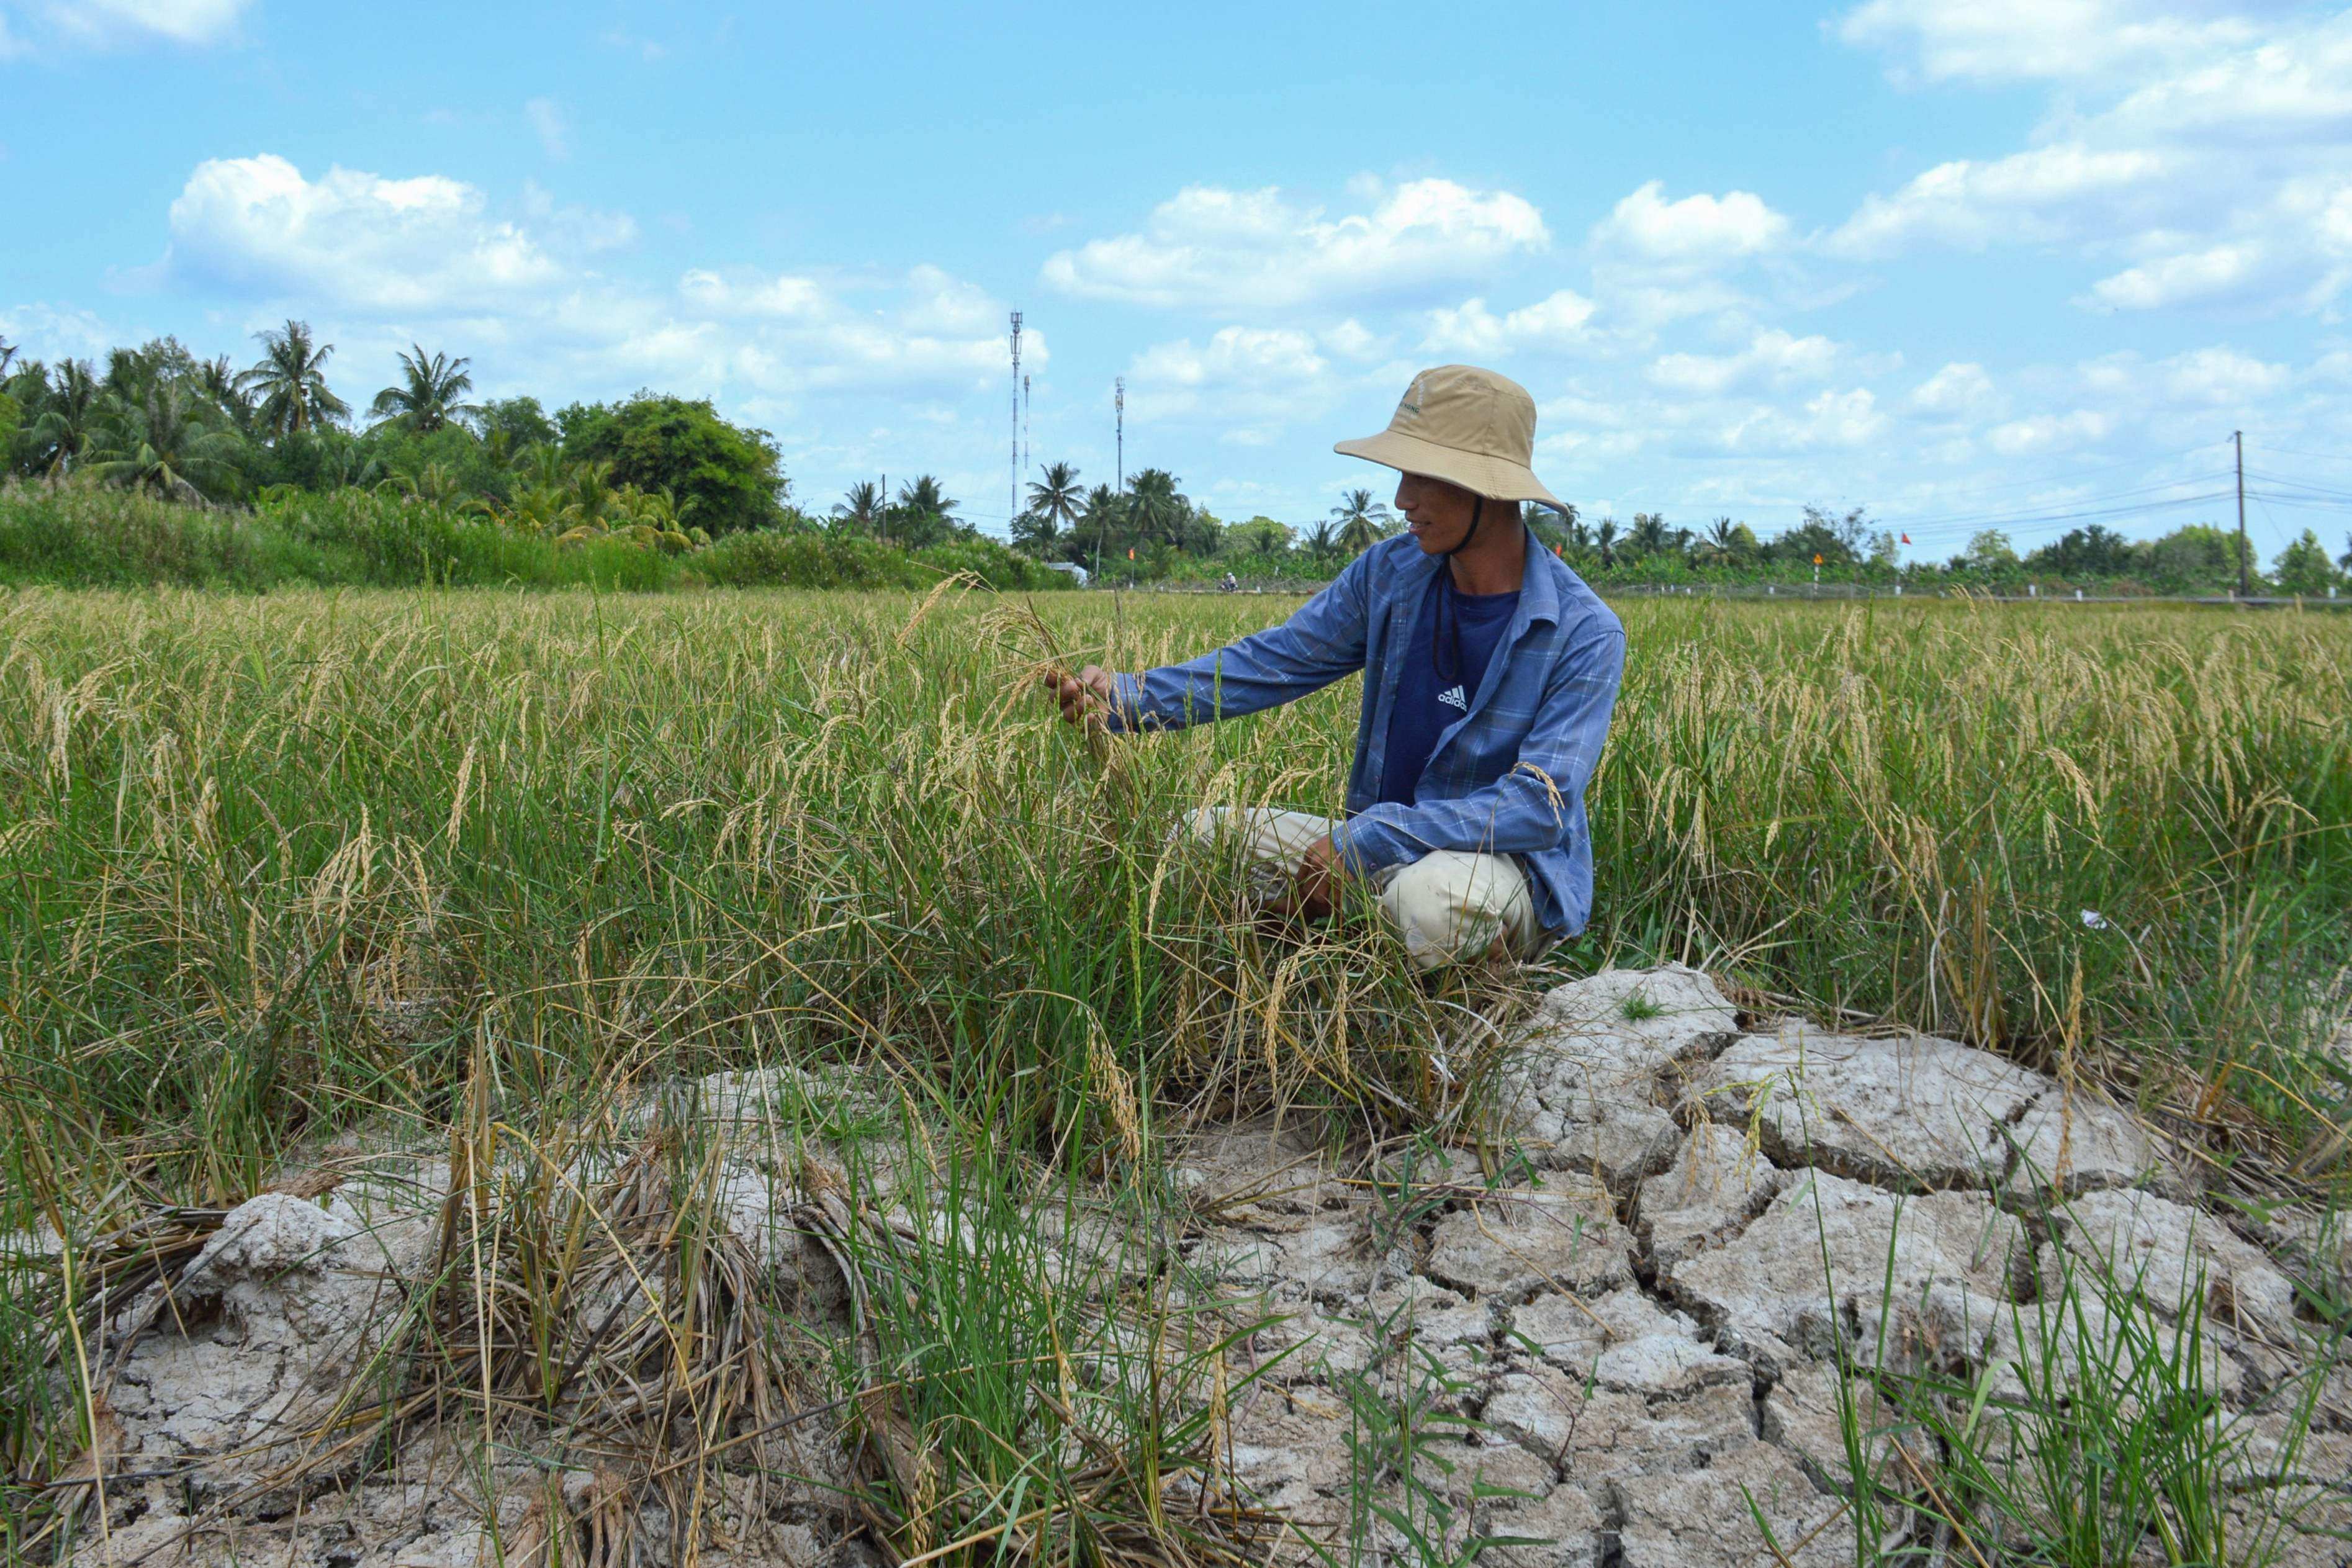 A farmer looks at his crop in a dry rice field in southern Vietnam’s Ca Mau province, amid a long heatwave, on February 23. The Asean region is highly vulnerable to climate change. Photo: AFP